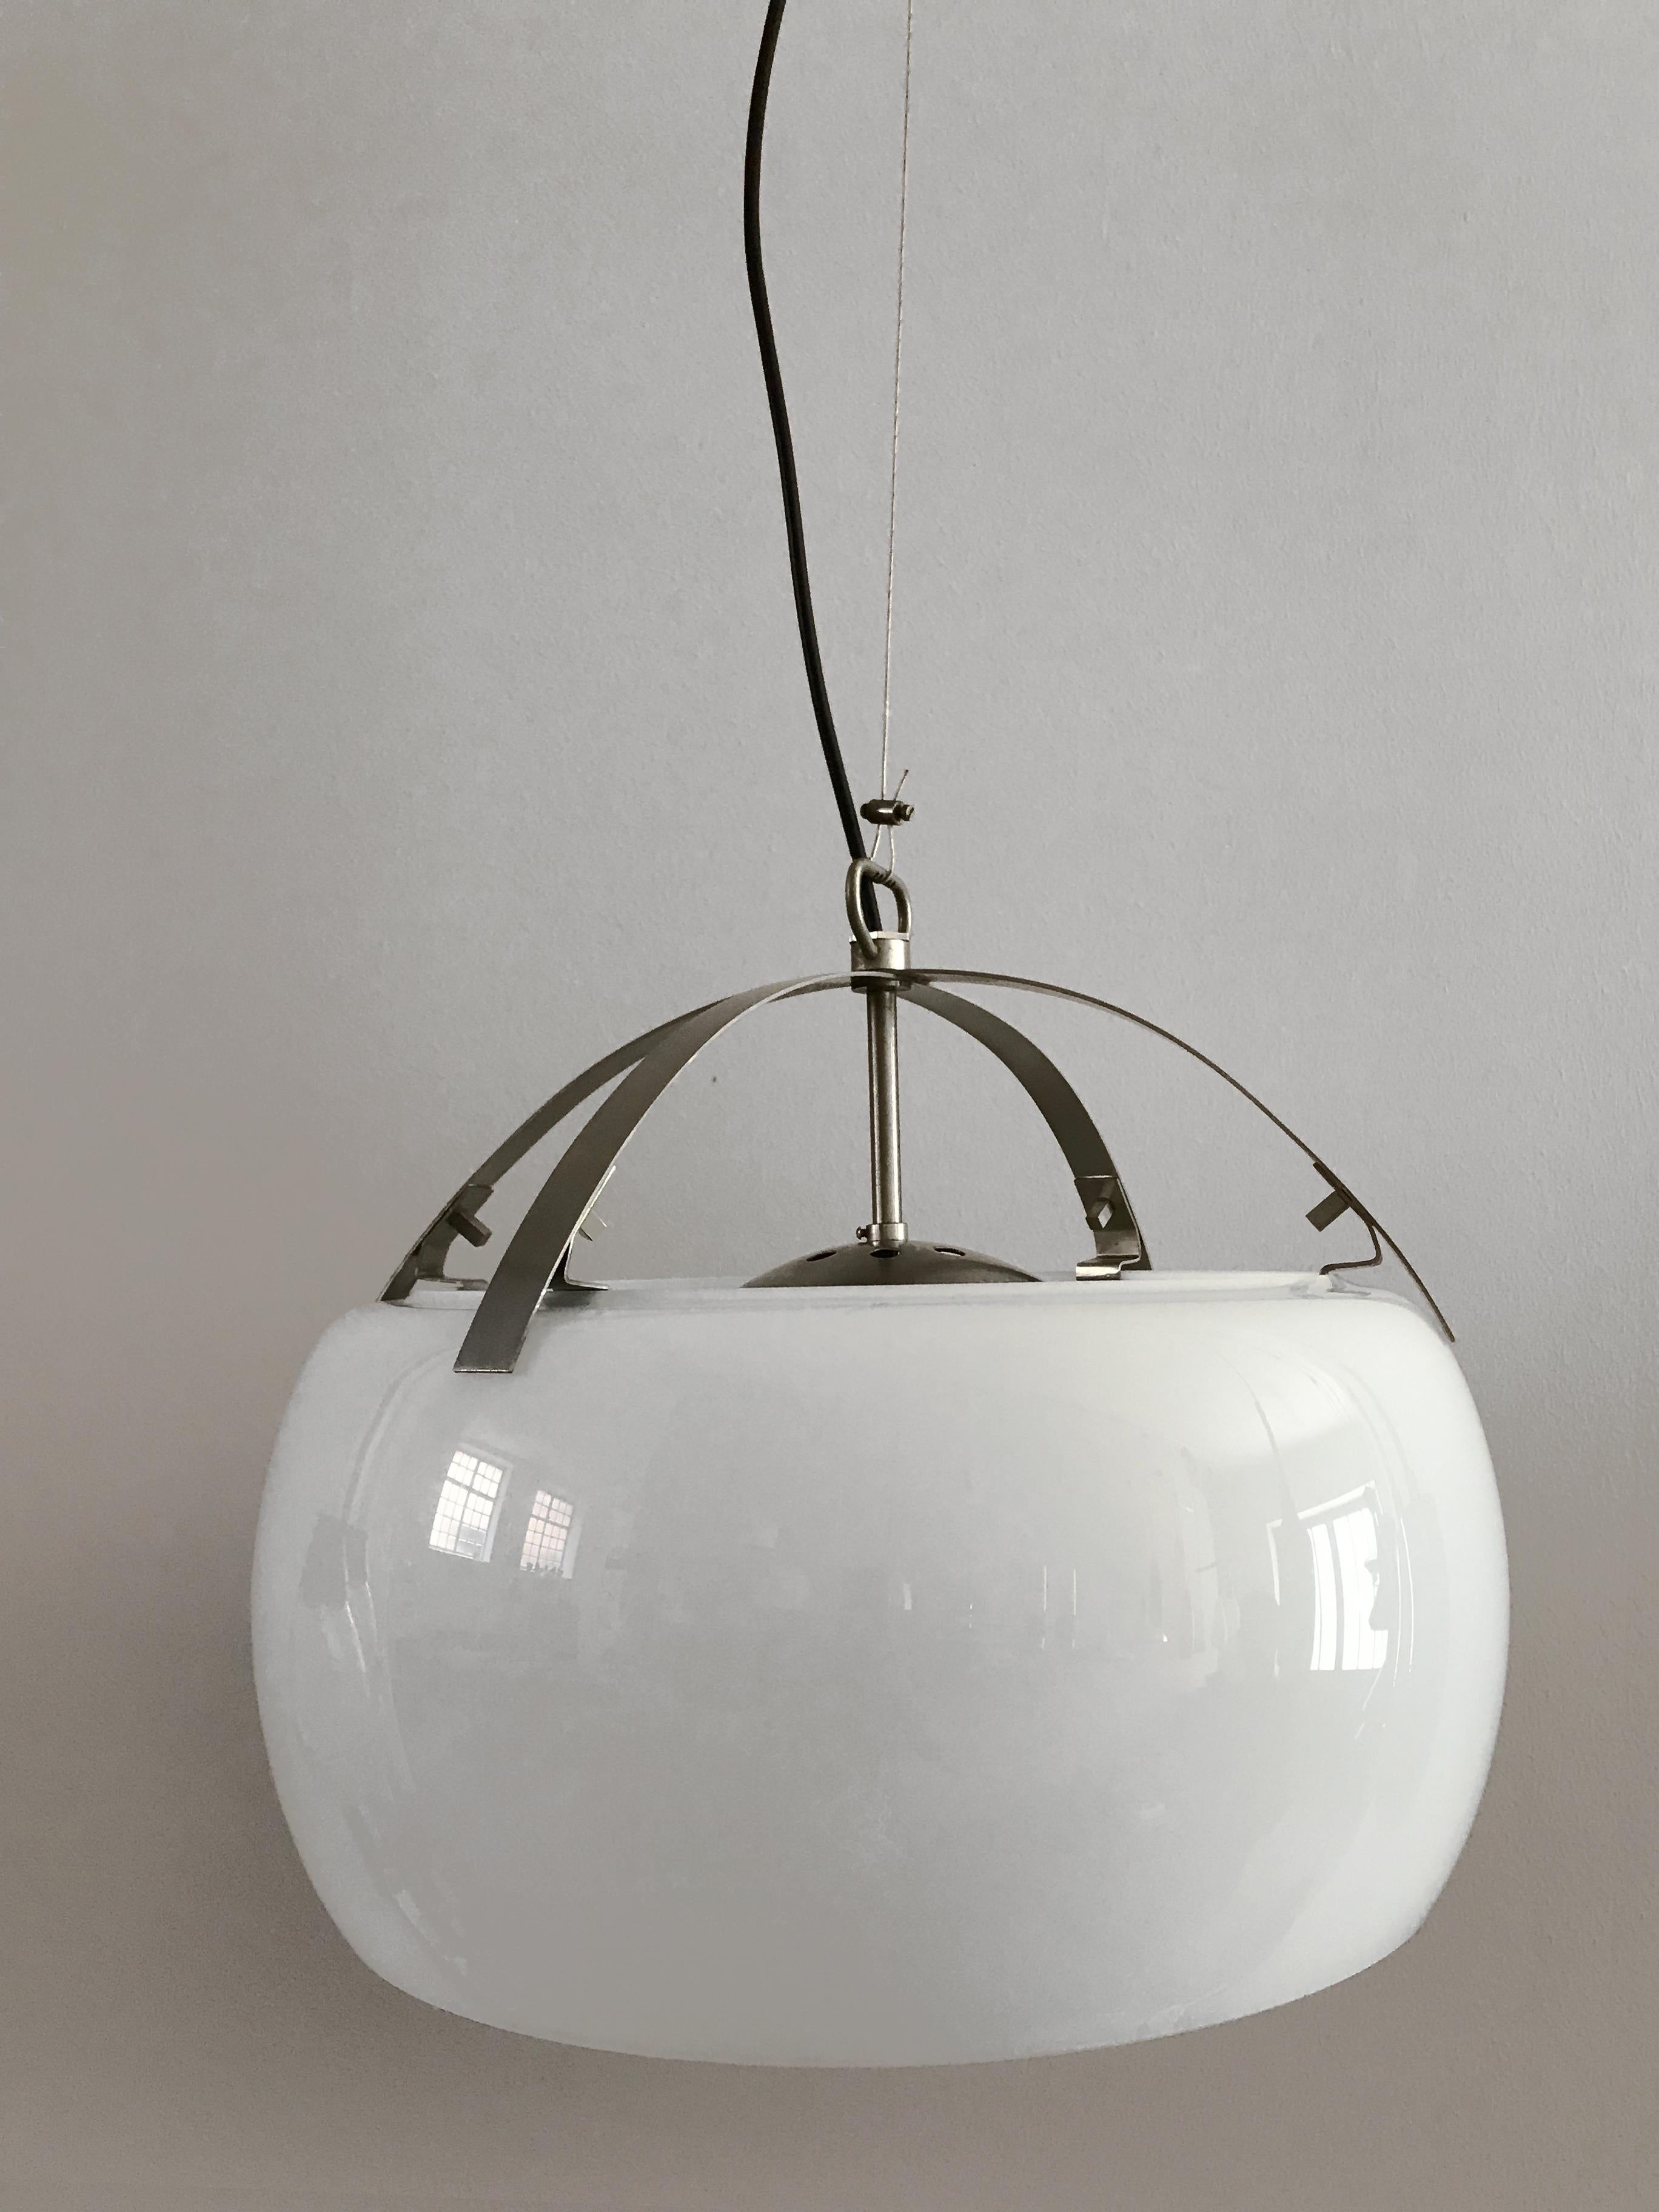 Italian Mid-Century Modern pendant lamp model Omega designed by Vico Magistretti for Artemide in 1961, adjustable height, matte nickel-plated brass, opal glass.
White glass diffuser height 25 cm

Please note that the lamp is original of the